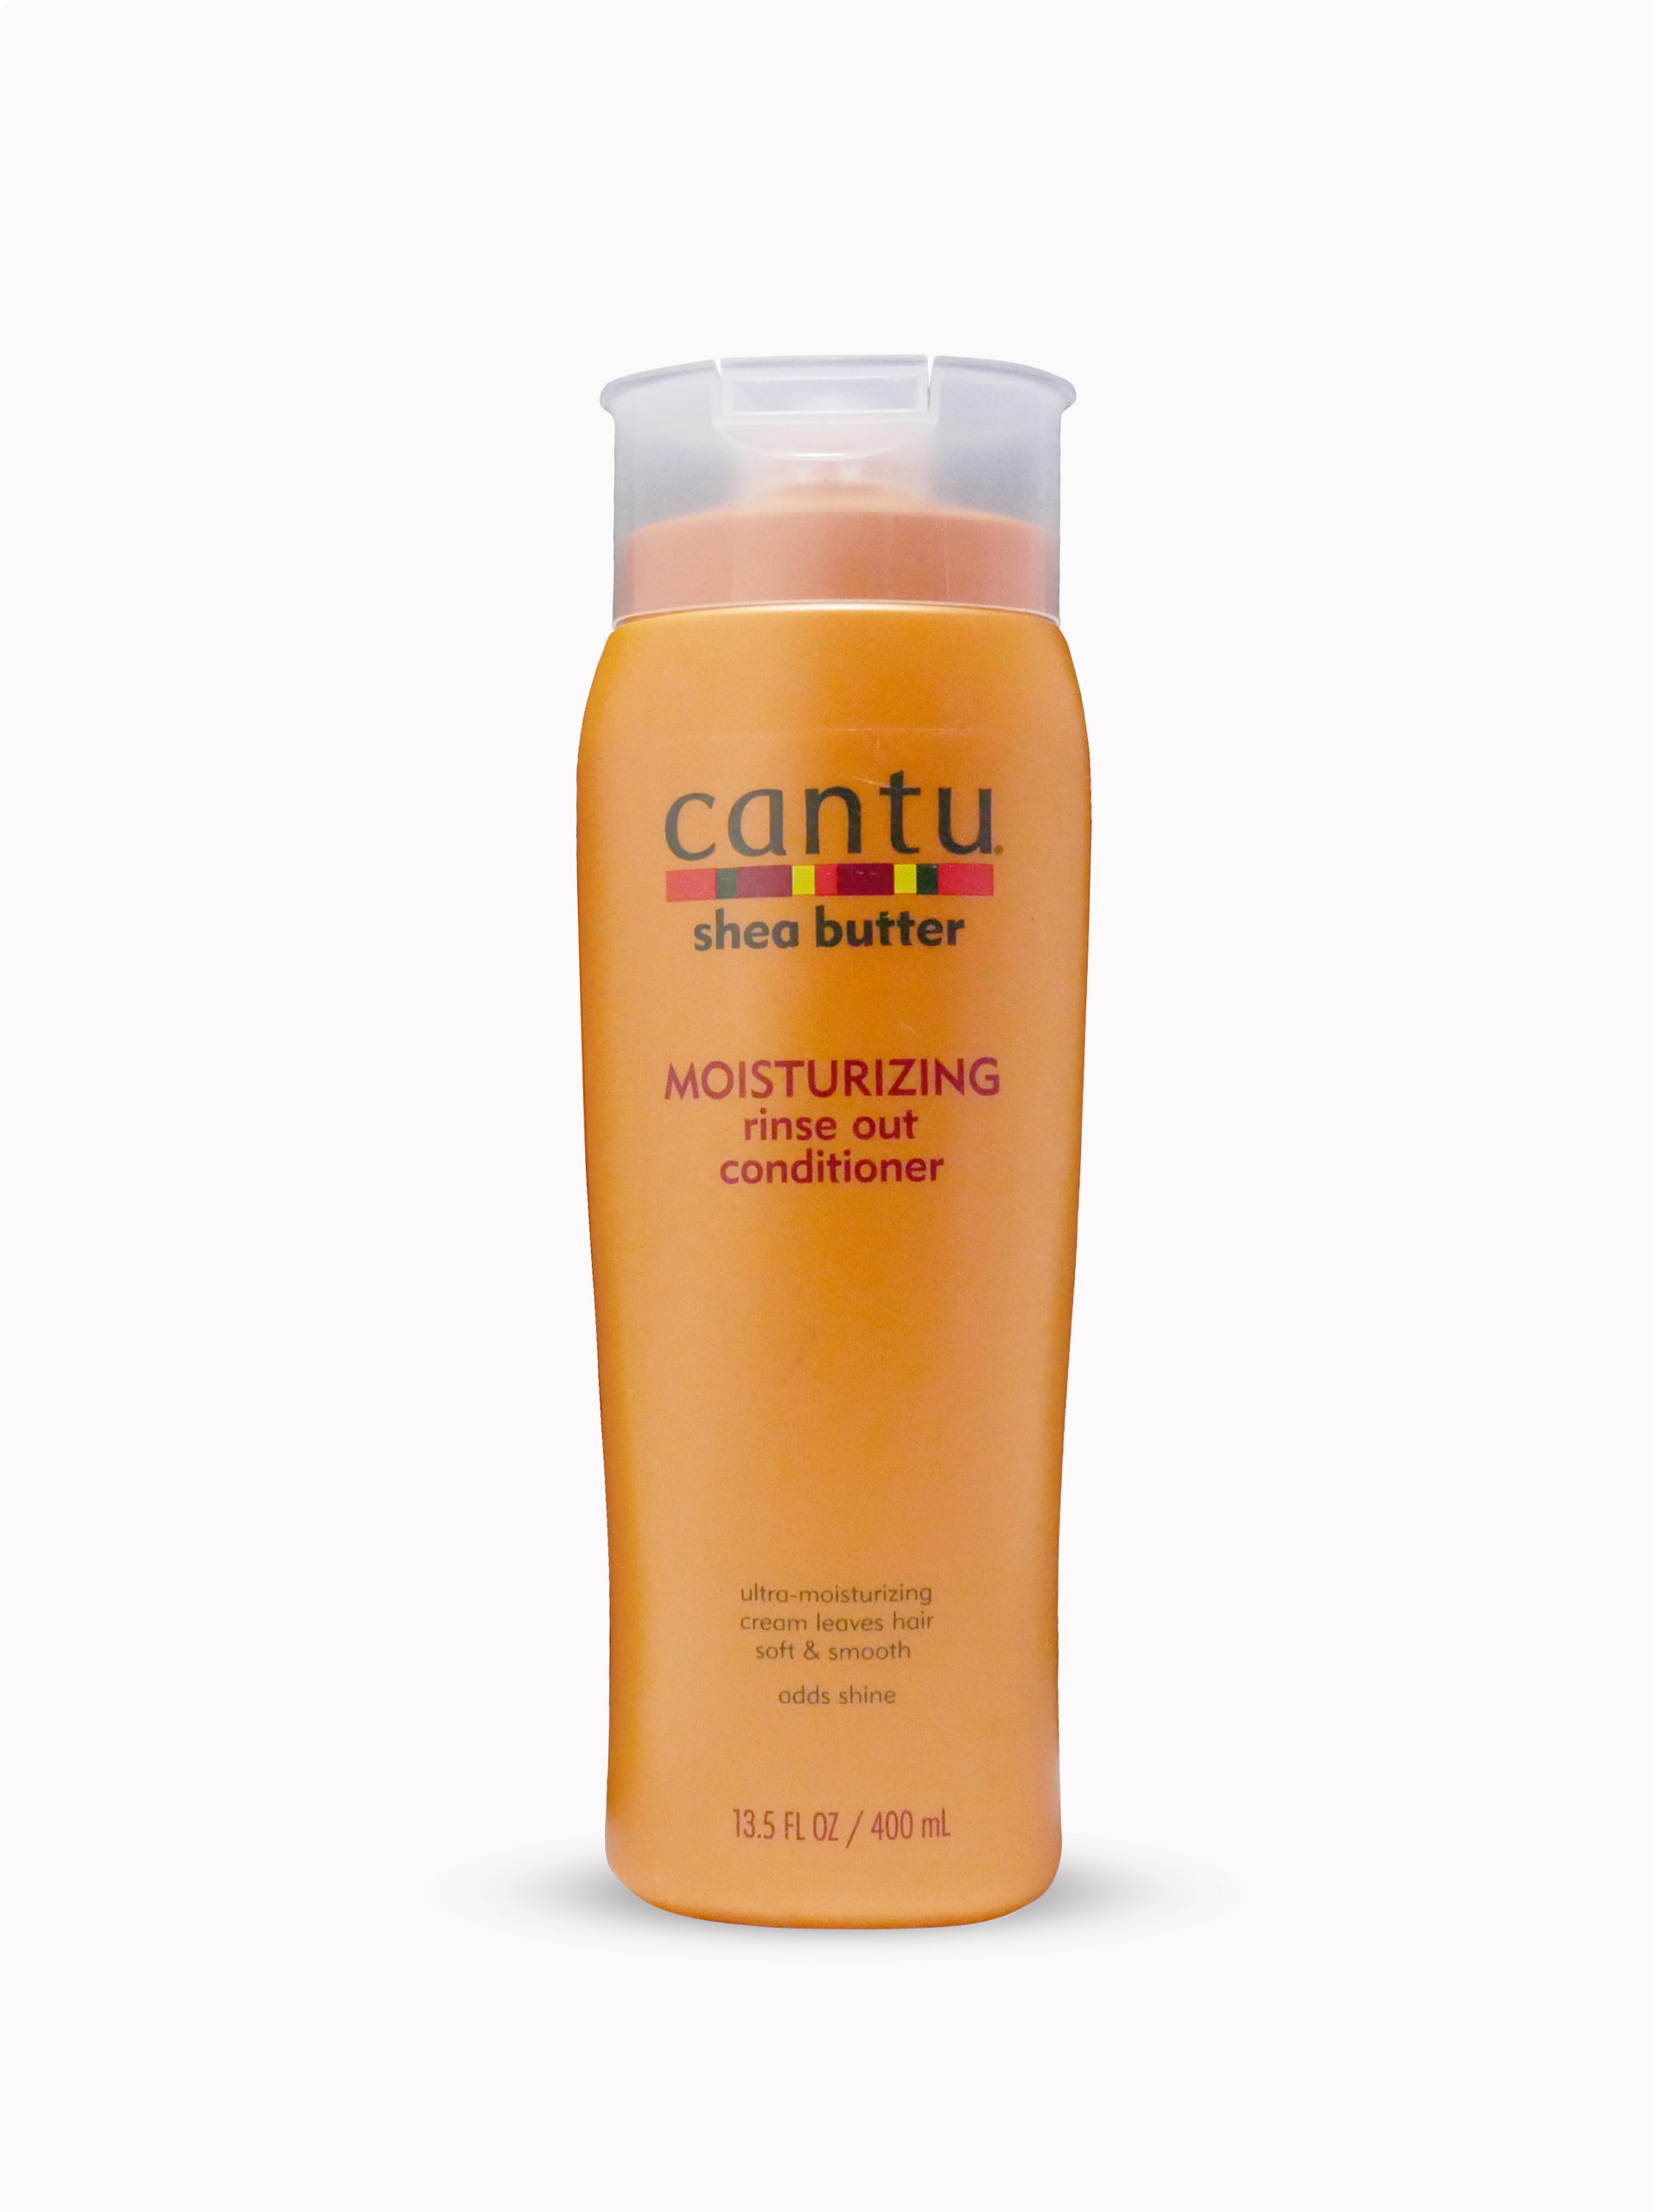 Cantu Shea Butter Moisturizer Rinse Out Conditioner Tropy Beauty